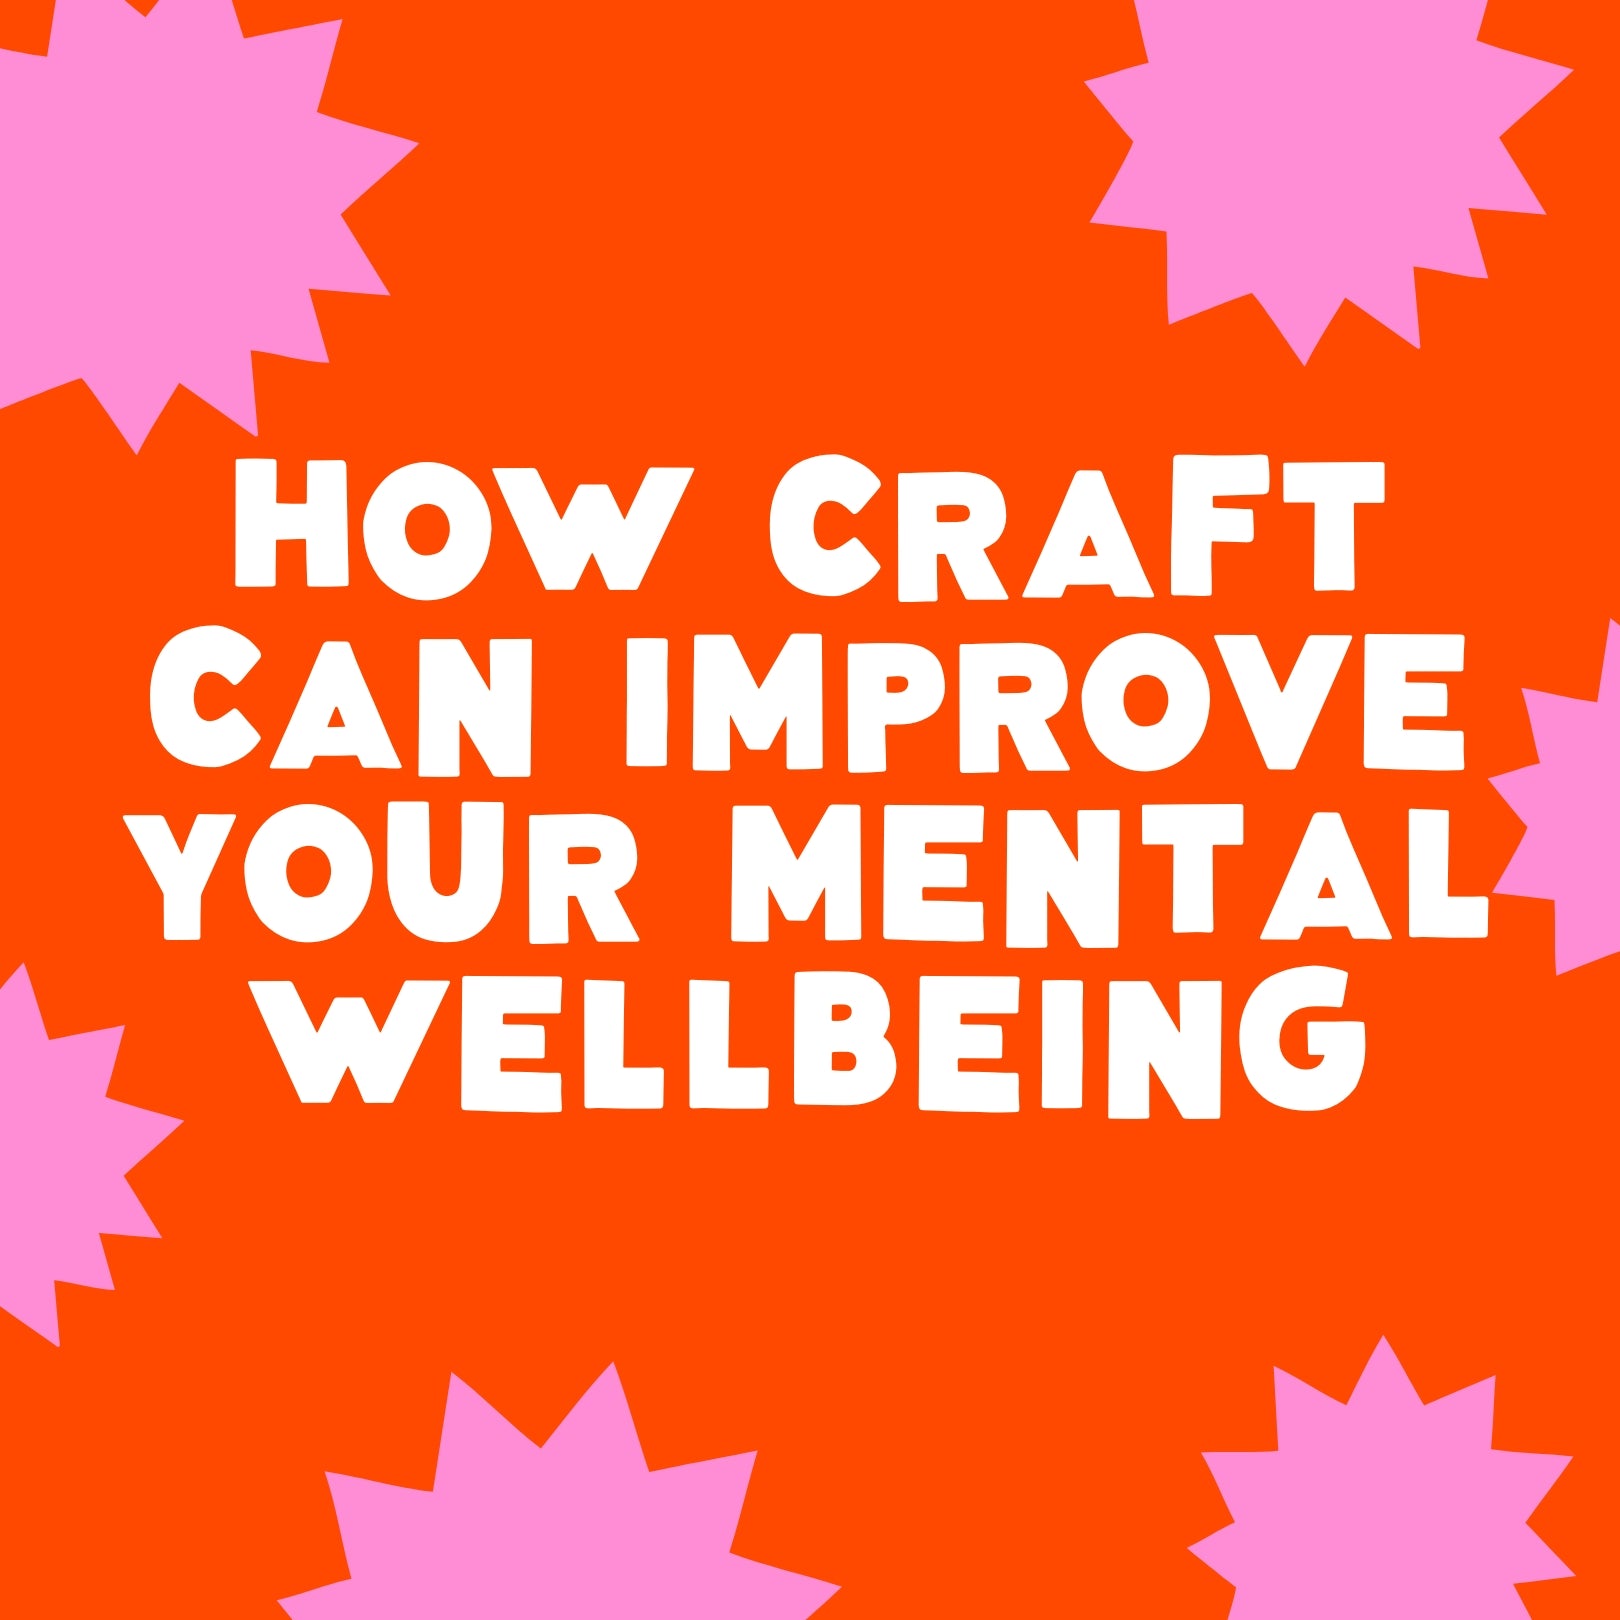 How Craft Can Improve Your Mental Wellbeing